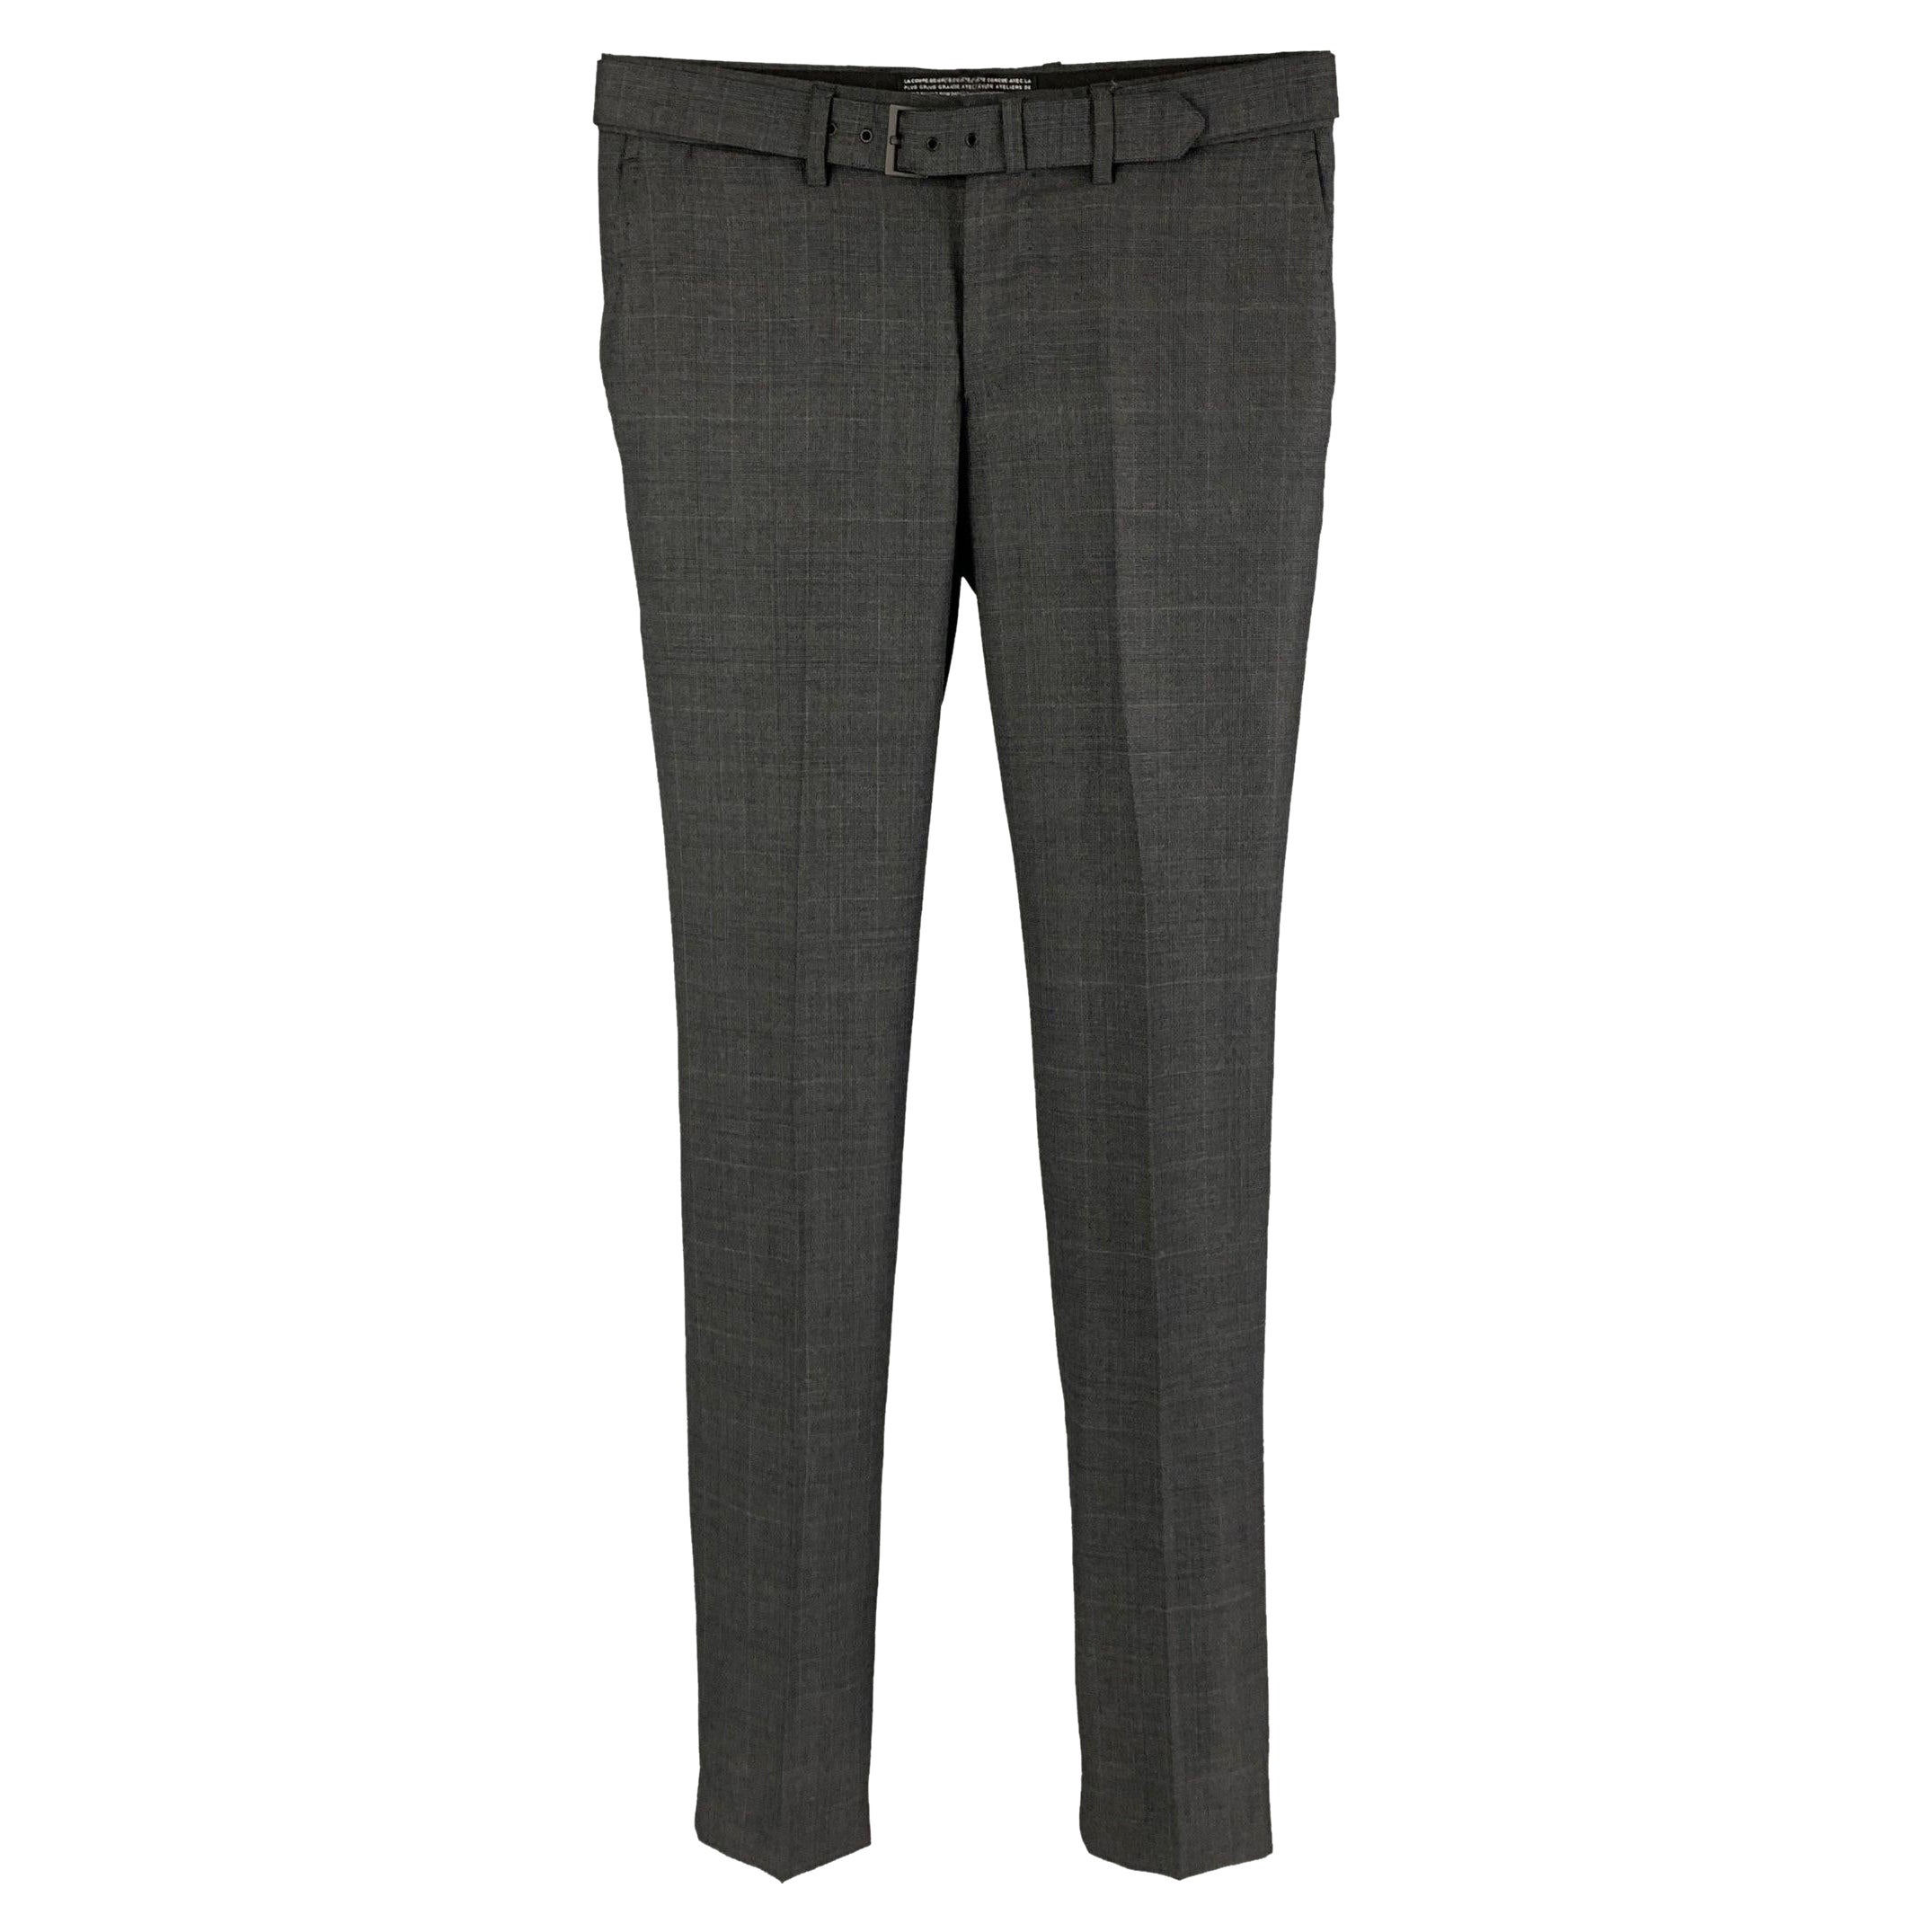 THE KOOPLES Size 28 Charcoal Grey Plaid Wool Zip Fly Dress Pants For Sale